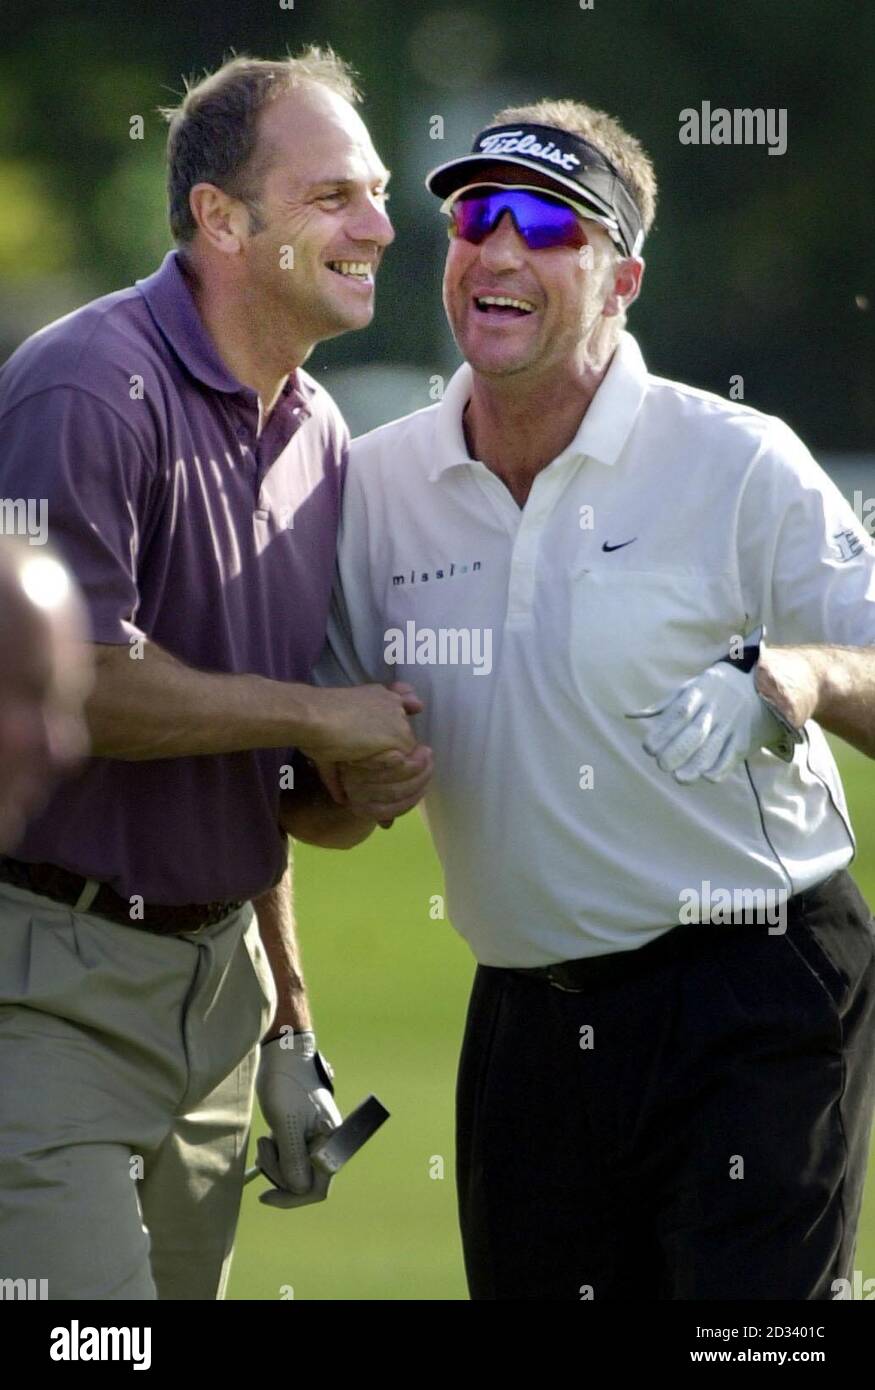 Olympic rowing gold medalist, Sir Steve Redgrave (left) shares a joke with former England cricketer, Ian Botham during a practice round for the 2002 Dunhill Links Championship at St Andrews, Scotland.   *  The tournament is played over three links courses in rotation,the Old course at St Andrews, the Championship course at Carnoustie,and the Kingsbarns links course. The tournament will be played from Thursday October 3rd. Stock Photo